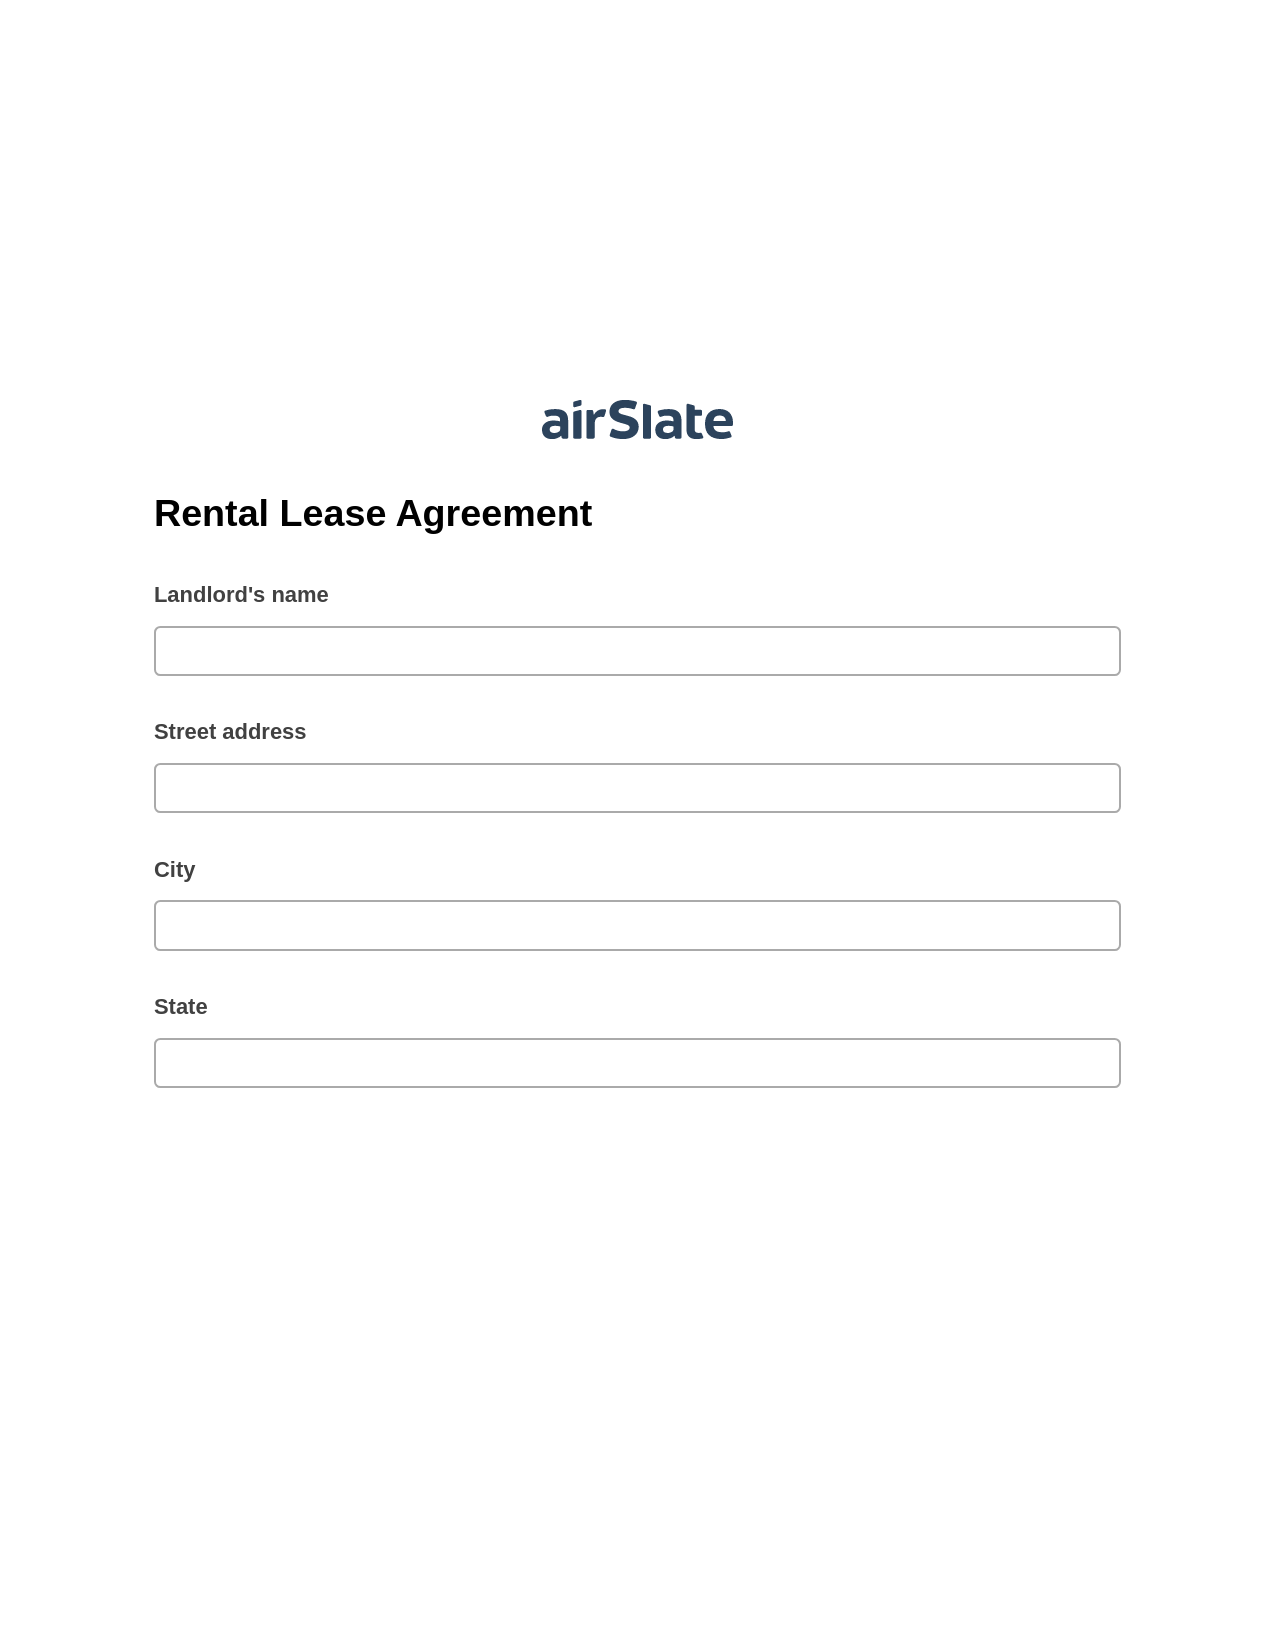 Rental Lease Agreement Pre-fill from Google Sheet Dropdown Options Bot, Google Cloud Print Bot, Export to Excel 365 Bot